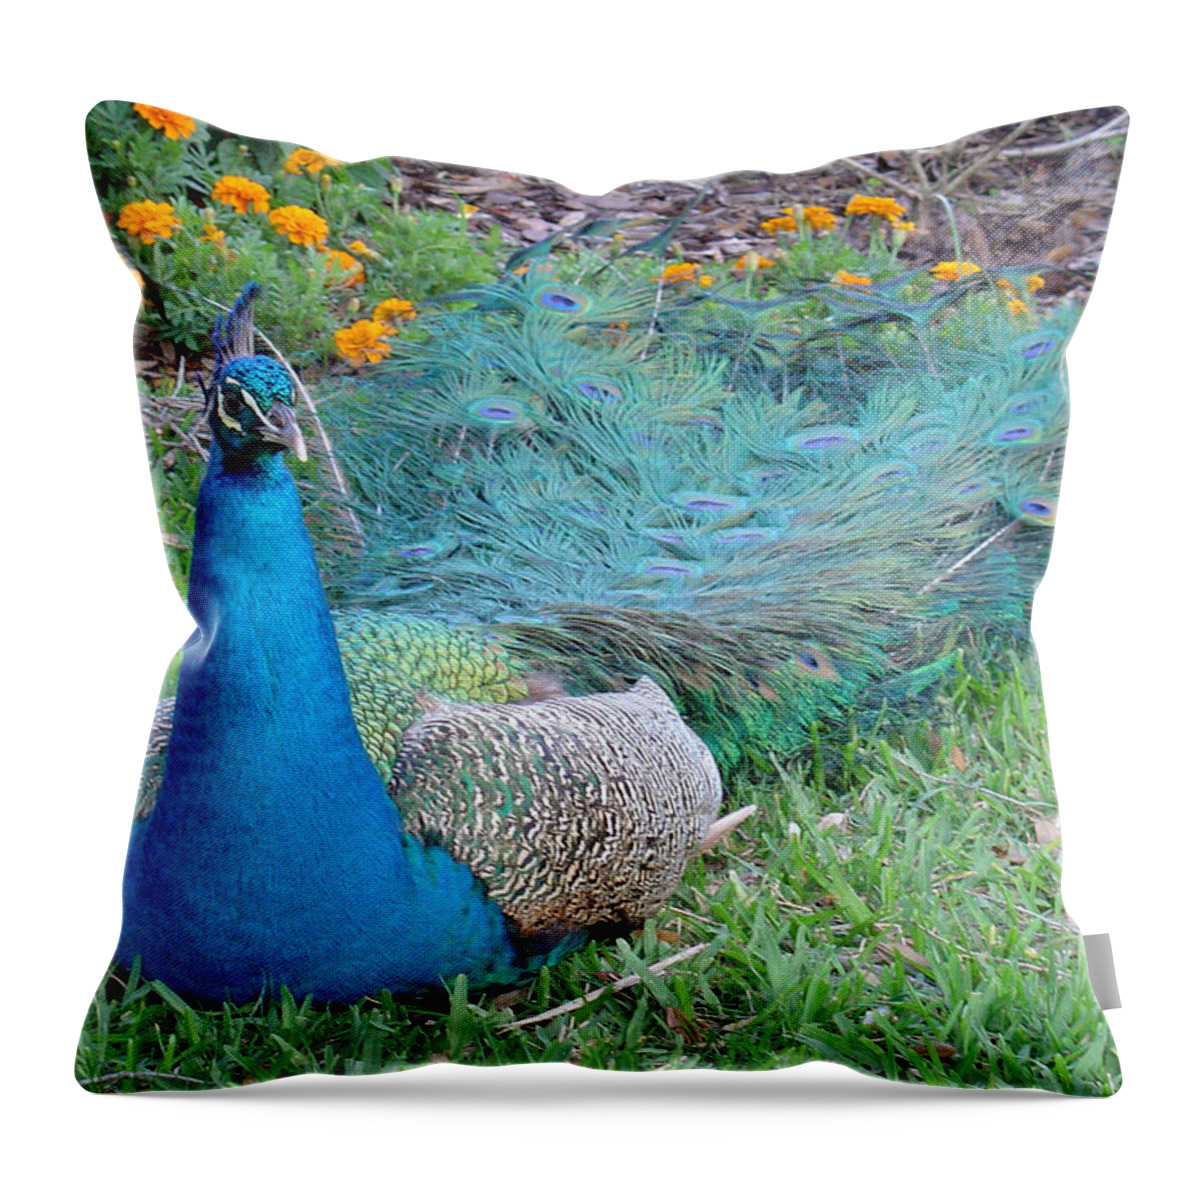 Peacock Throw Pillow featuring the photograph Bejeweled by David Nicholls